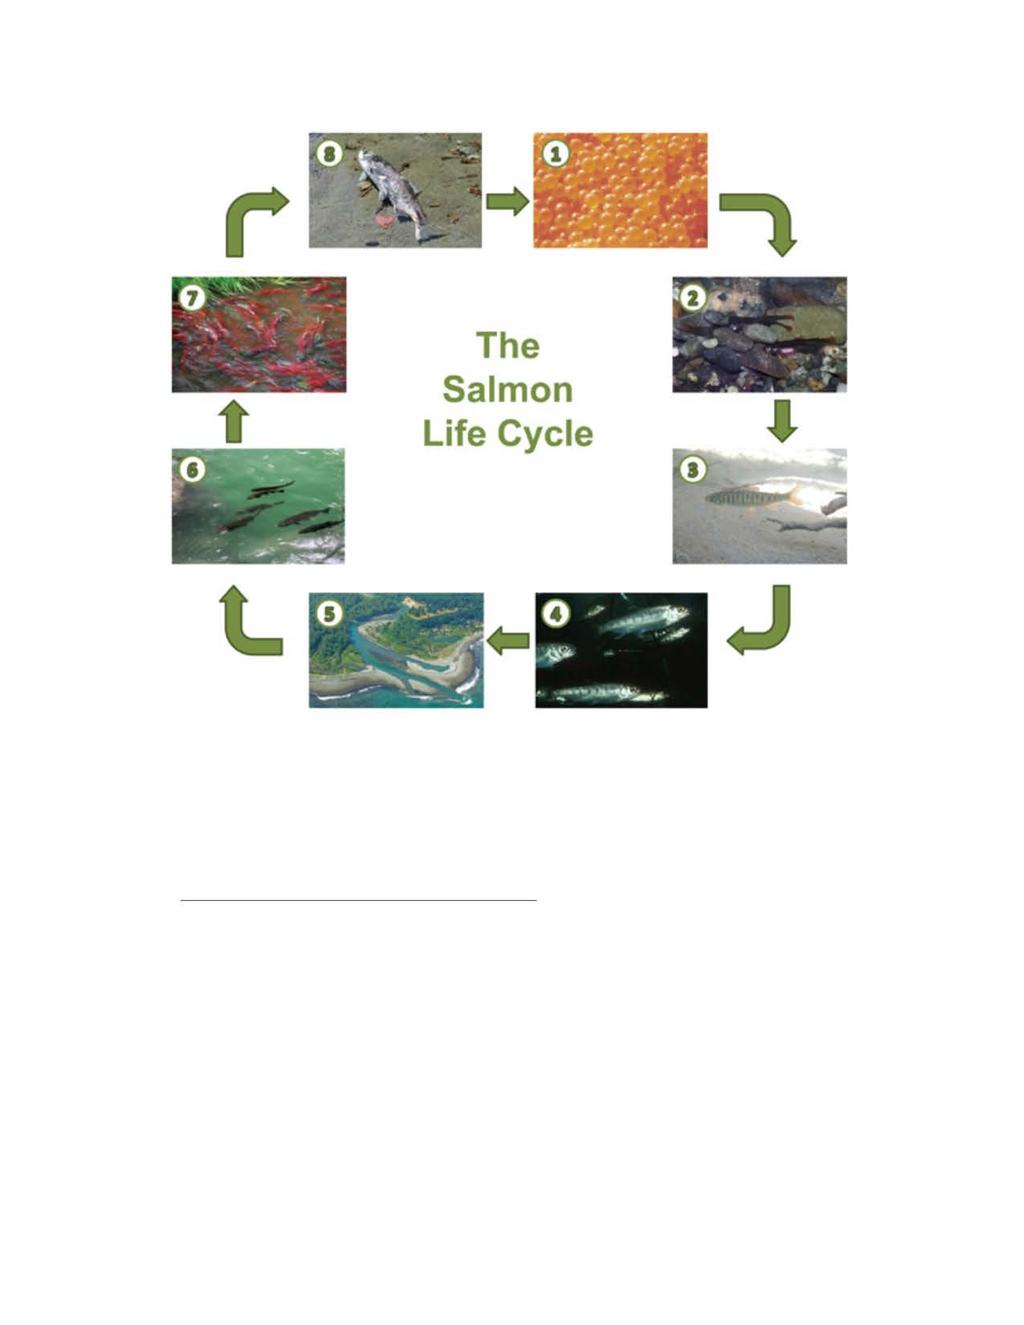 The Salmon Life Cyc e Figure 1. Anadromous salmon life cycle. http://www.nps.gov/olym/learn/nature/the-salmon-lifecycle.